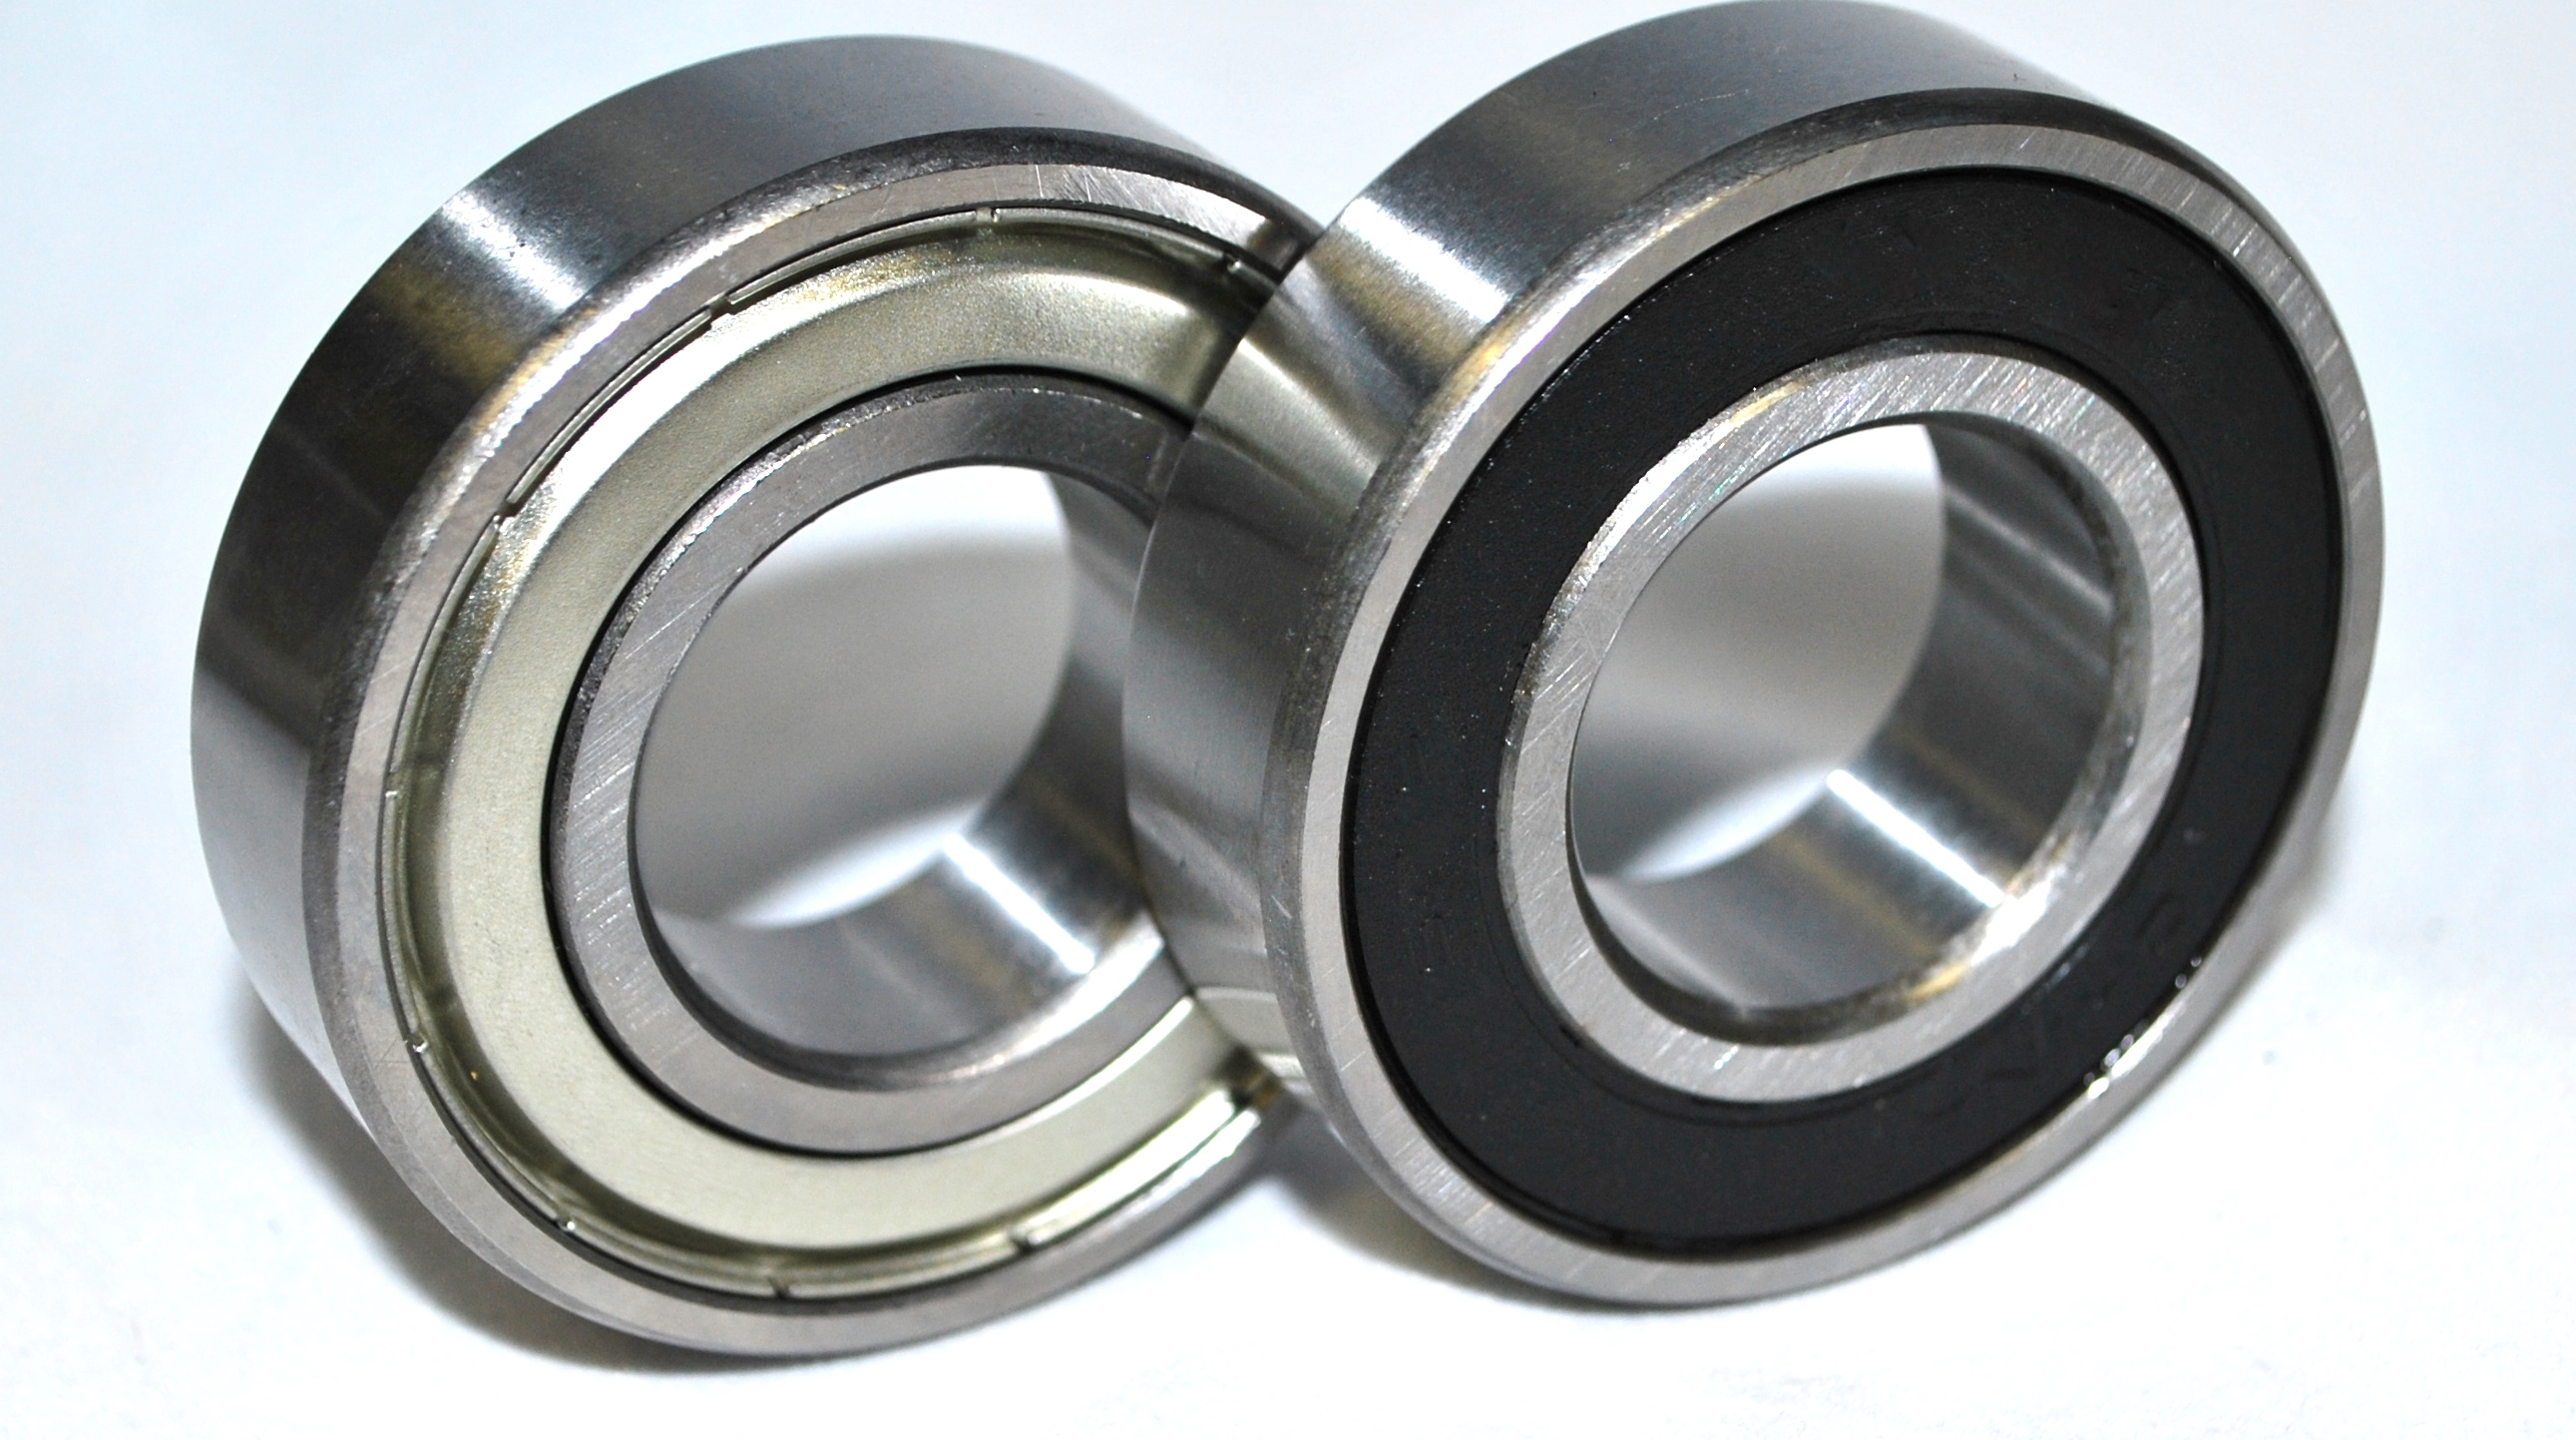 61903-2RS Bearing 61903 2RS 61903-2rs 6903 2rs,6903 dimension 17x30x7 6903RS 